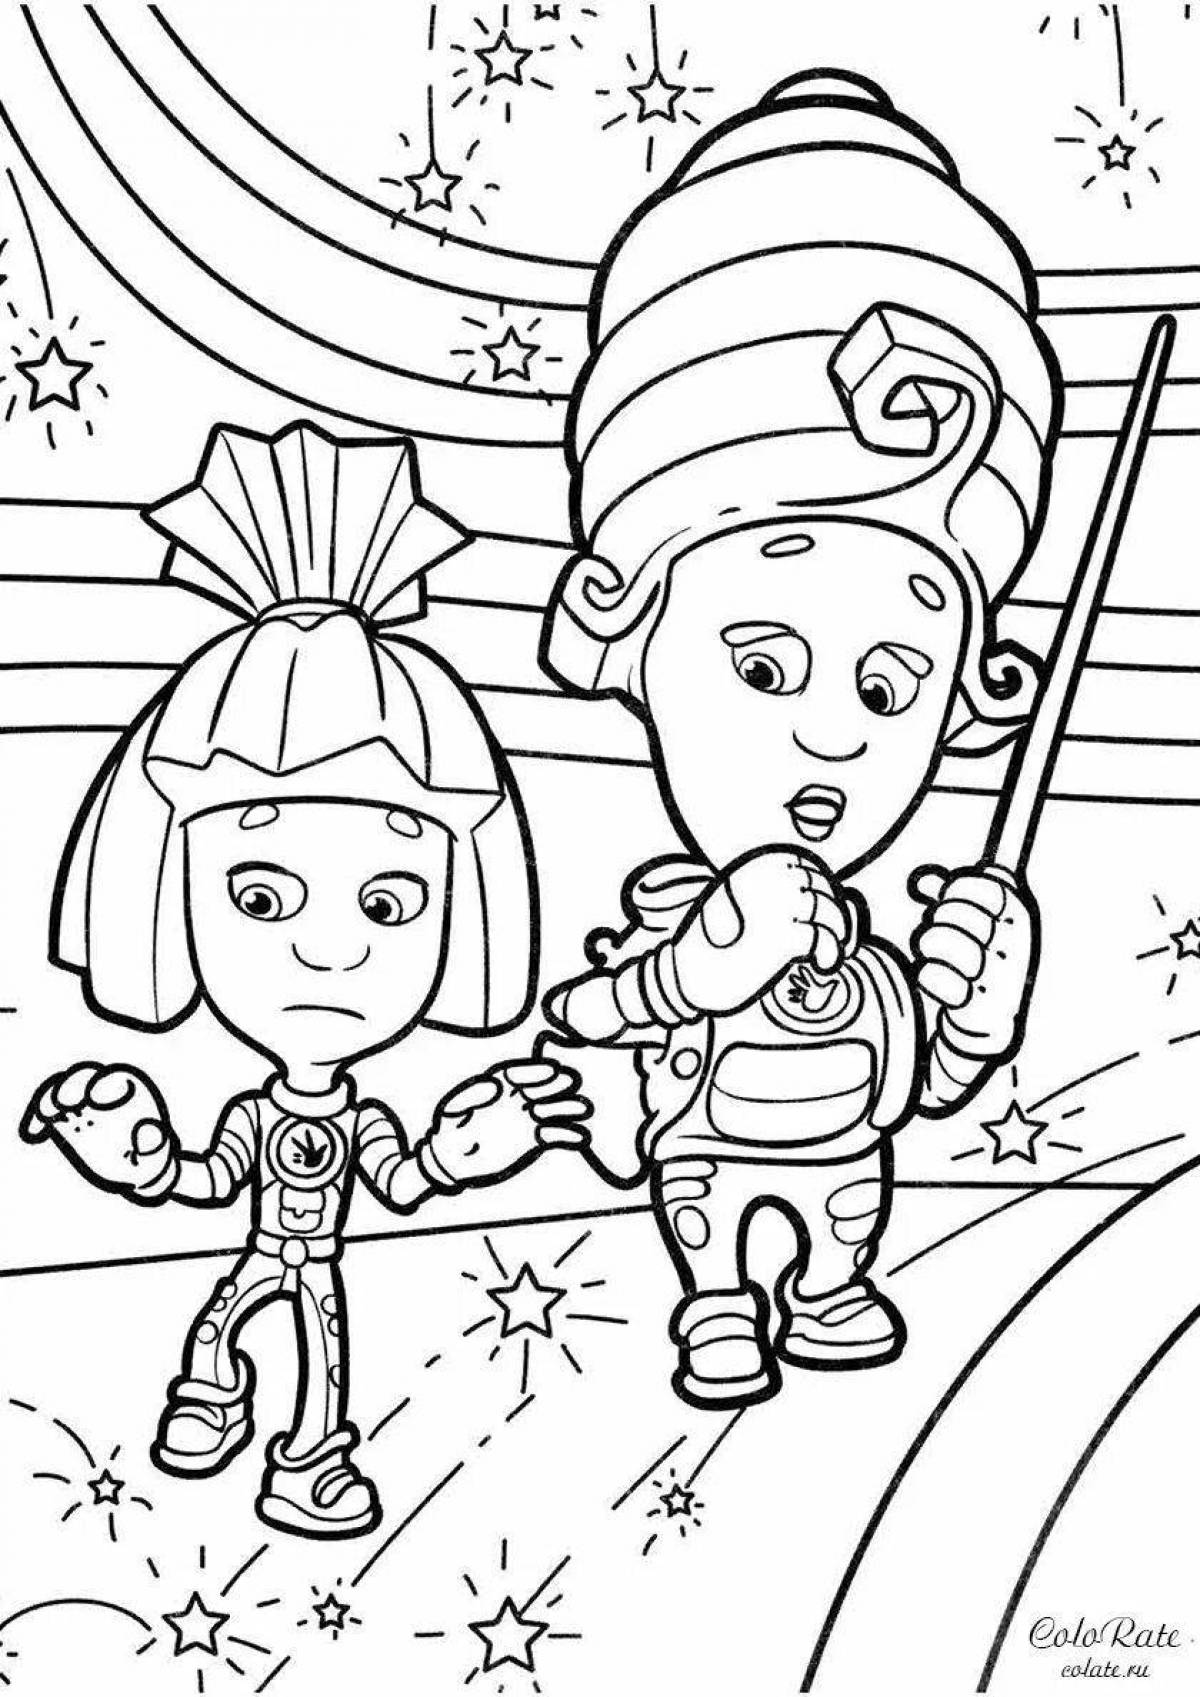 Fun coloring book for boys and girls aged 6